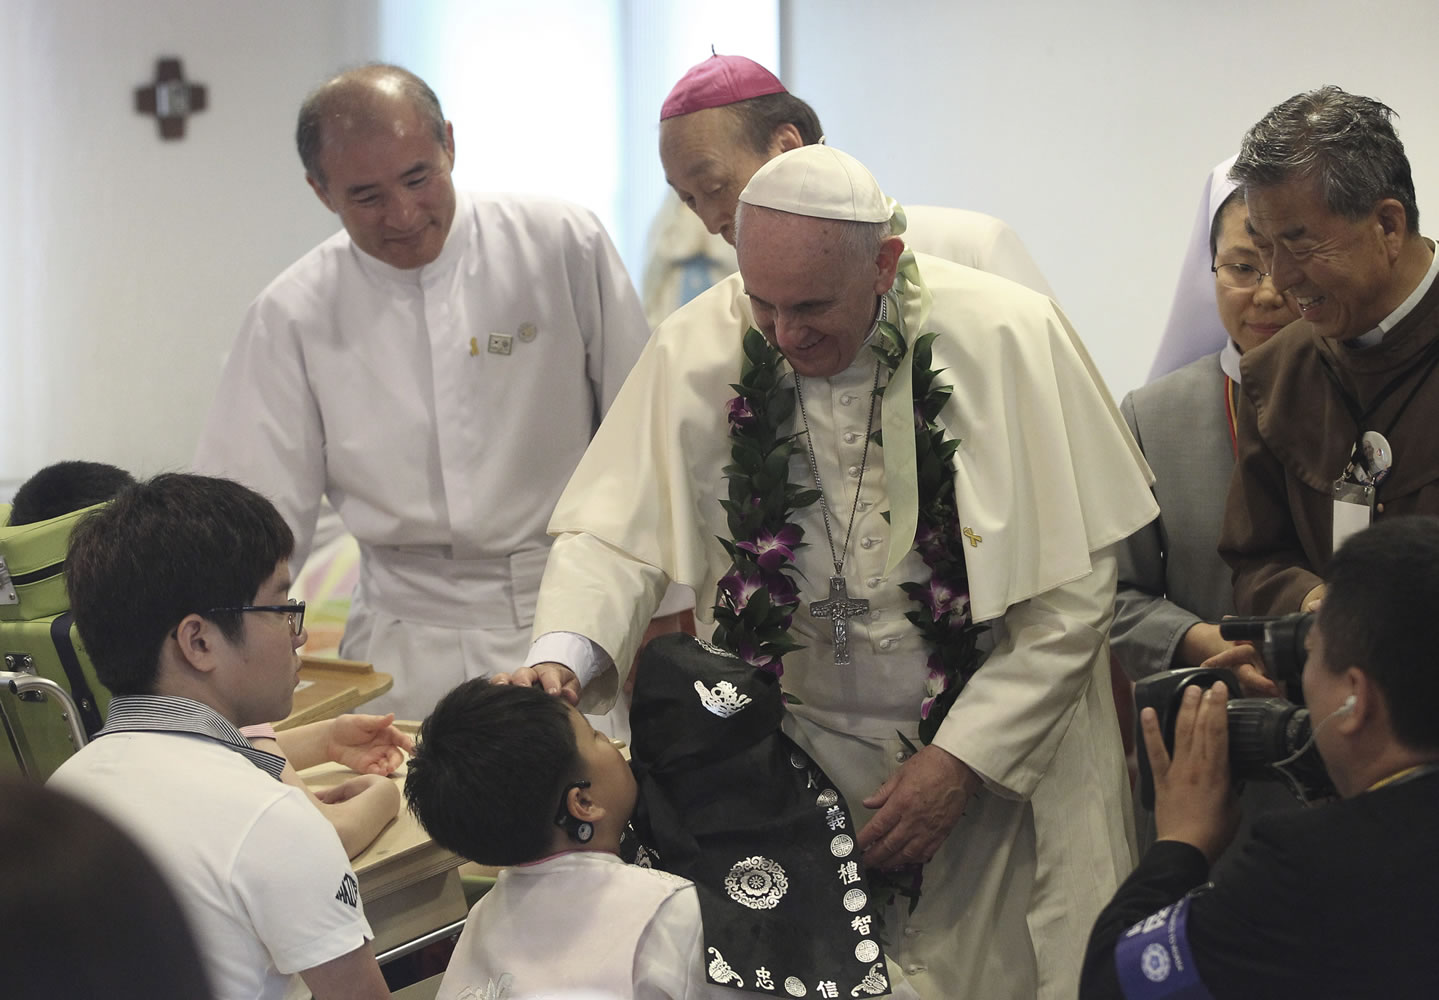 Pope Francis blesses to a disabled child during his visit to the rehabilitation center for disabled people at Kkottongnae in Eumseong, South Korea, on Saturday.